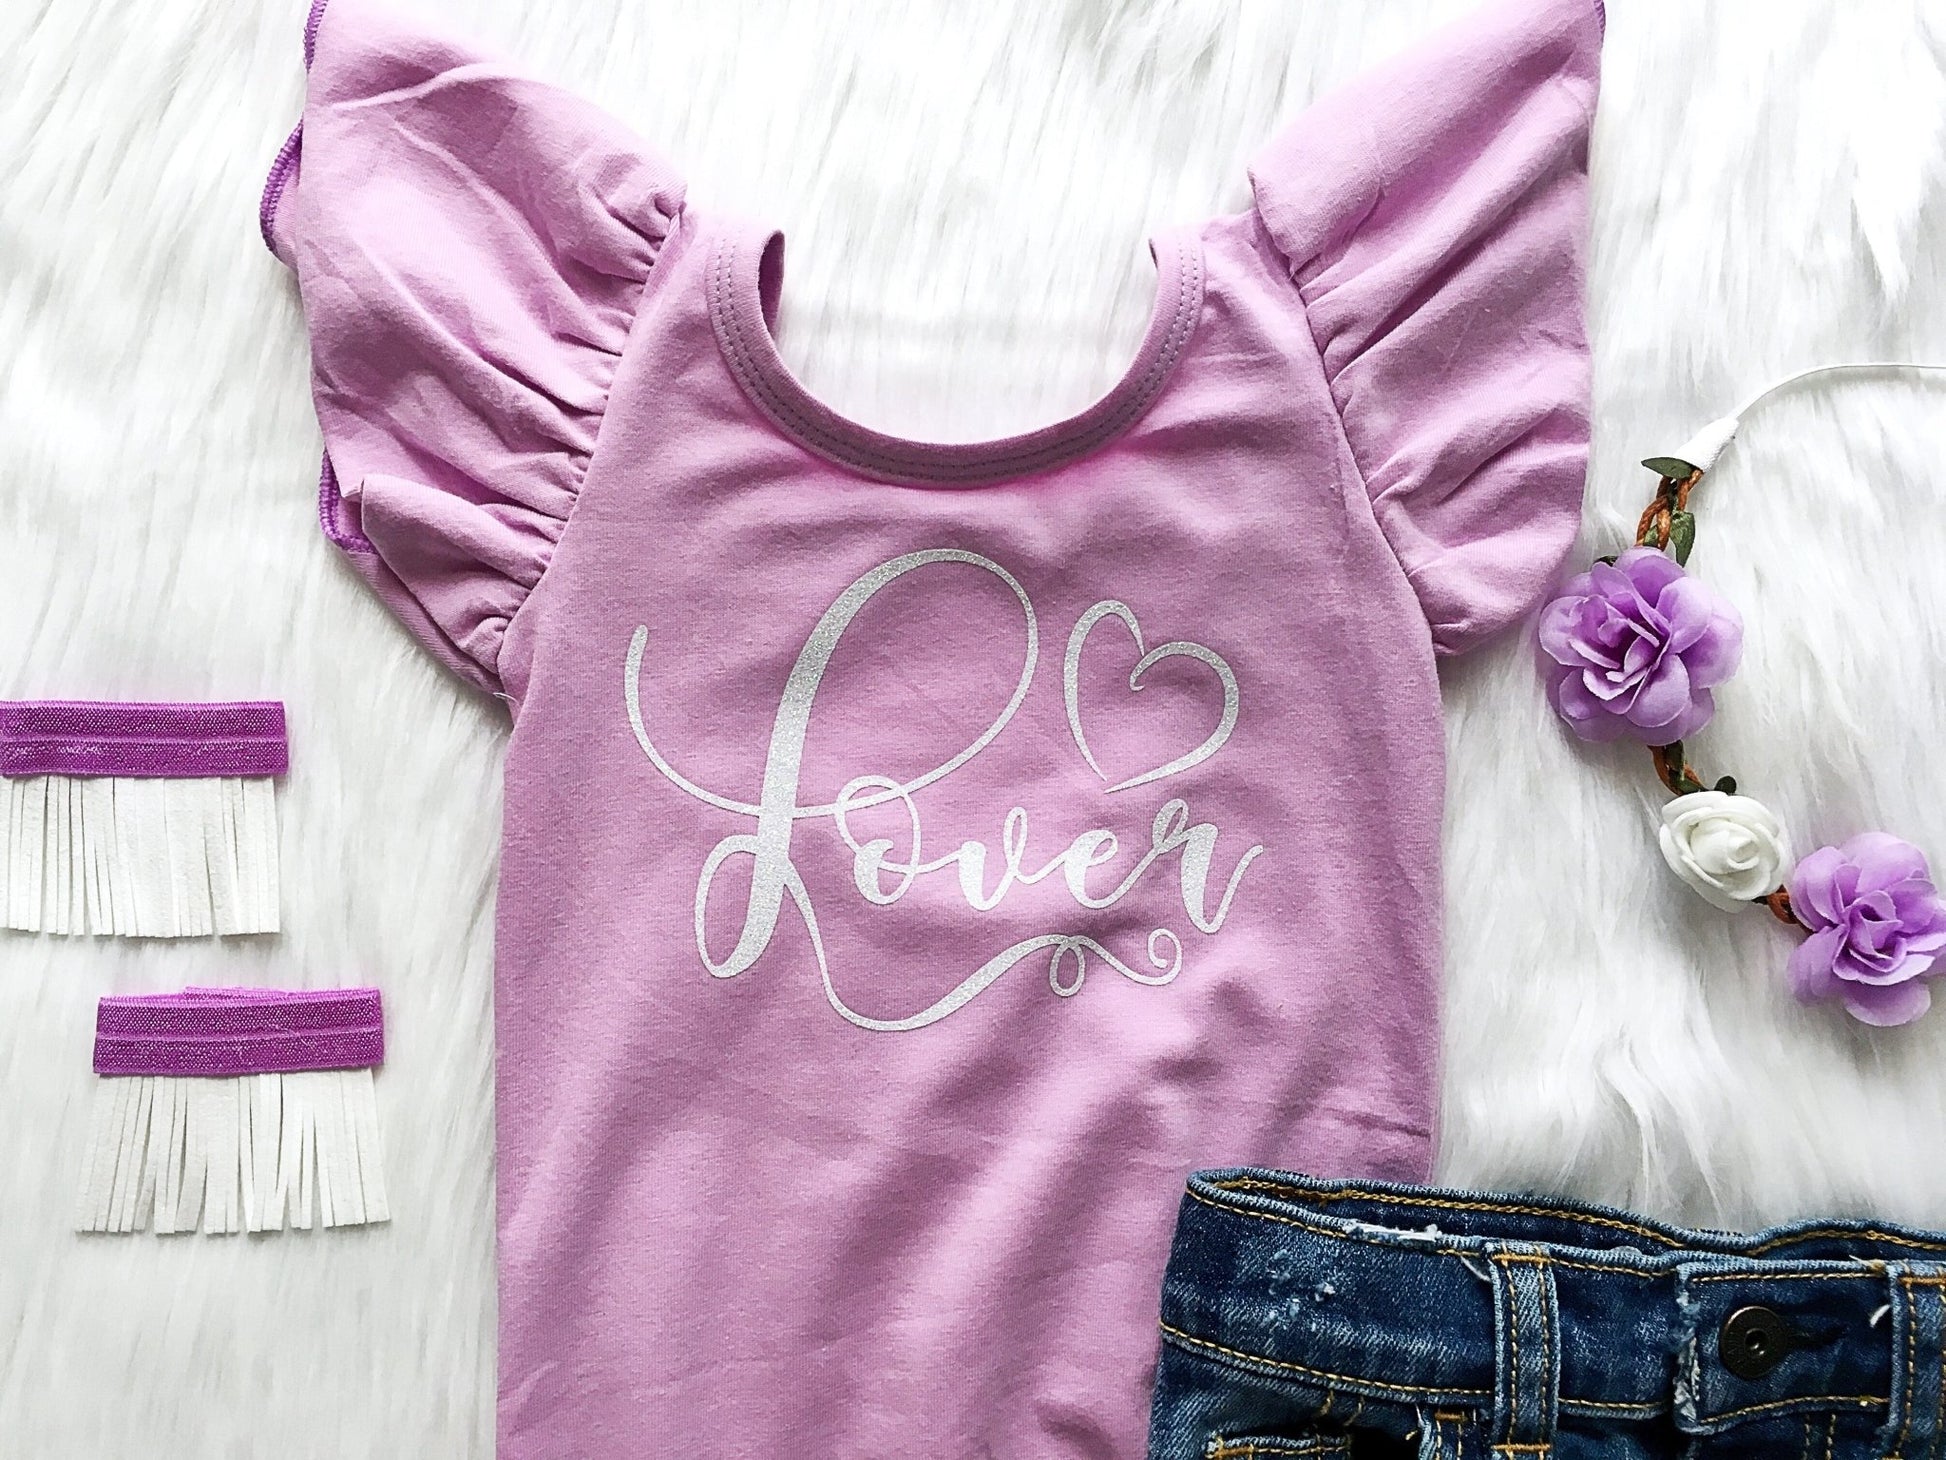 Girl's Lavender Little Lover Outfit - Squishy Cheeks